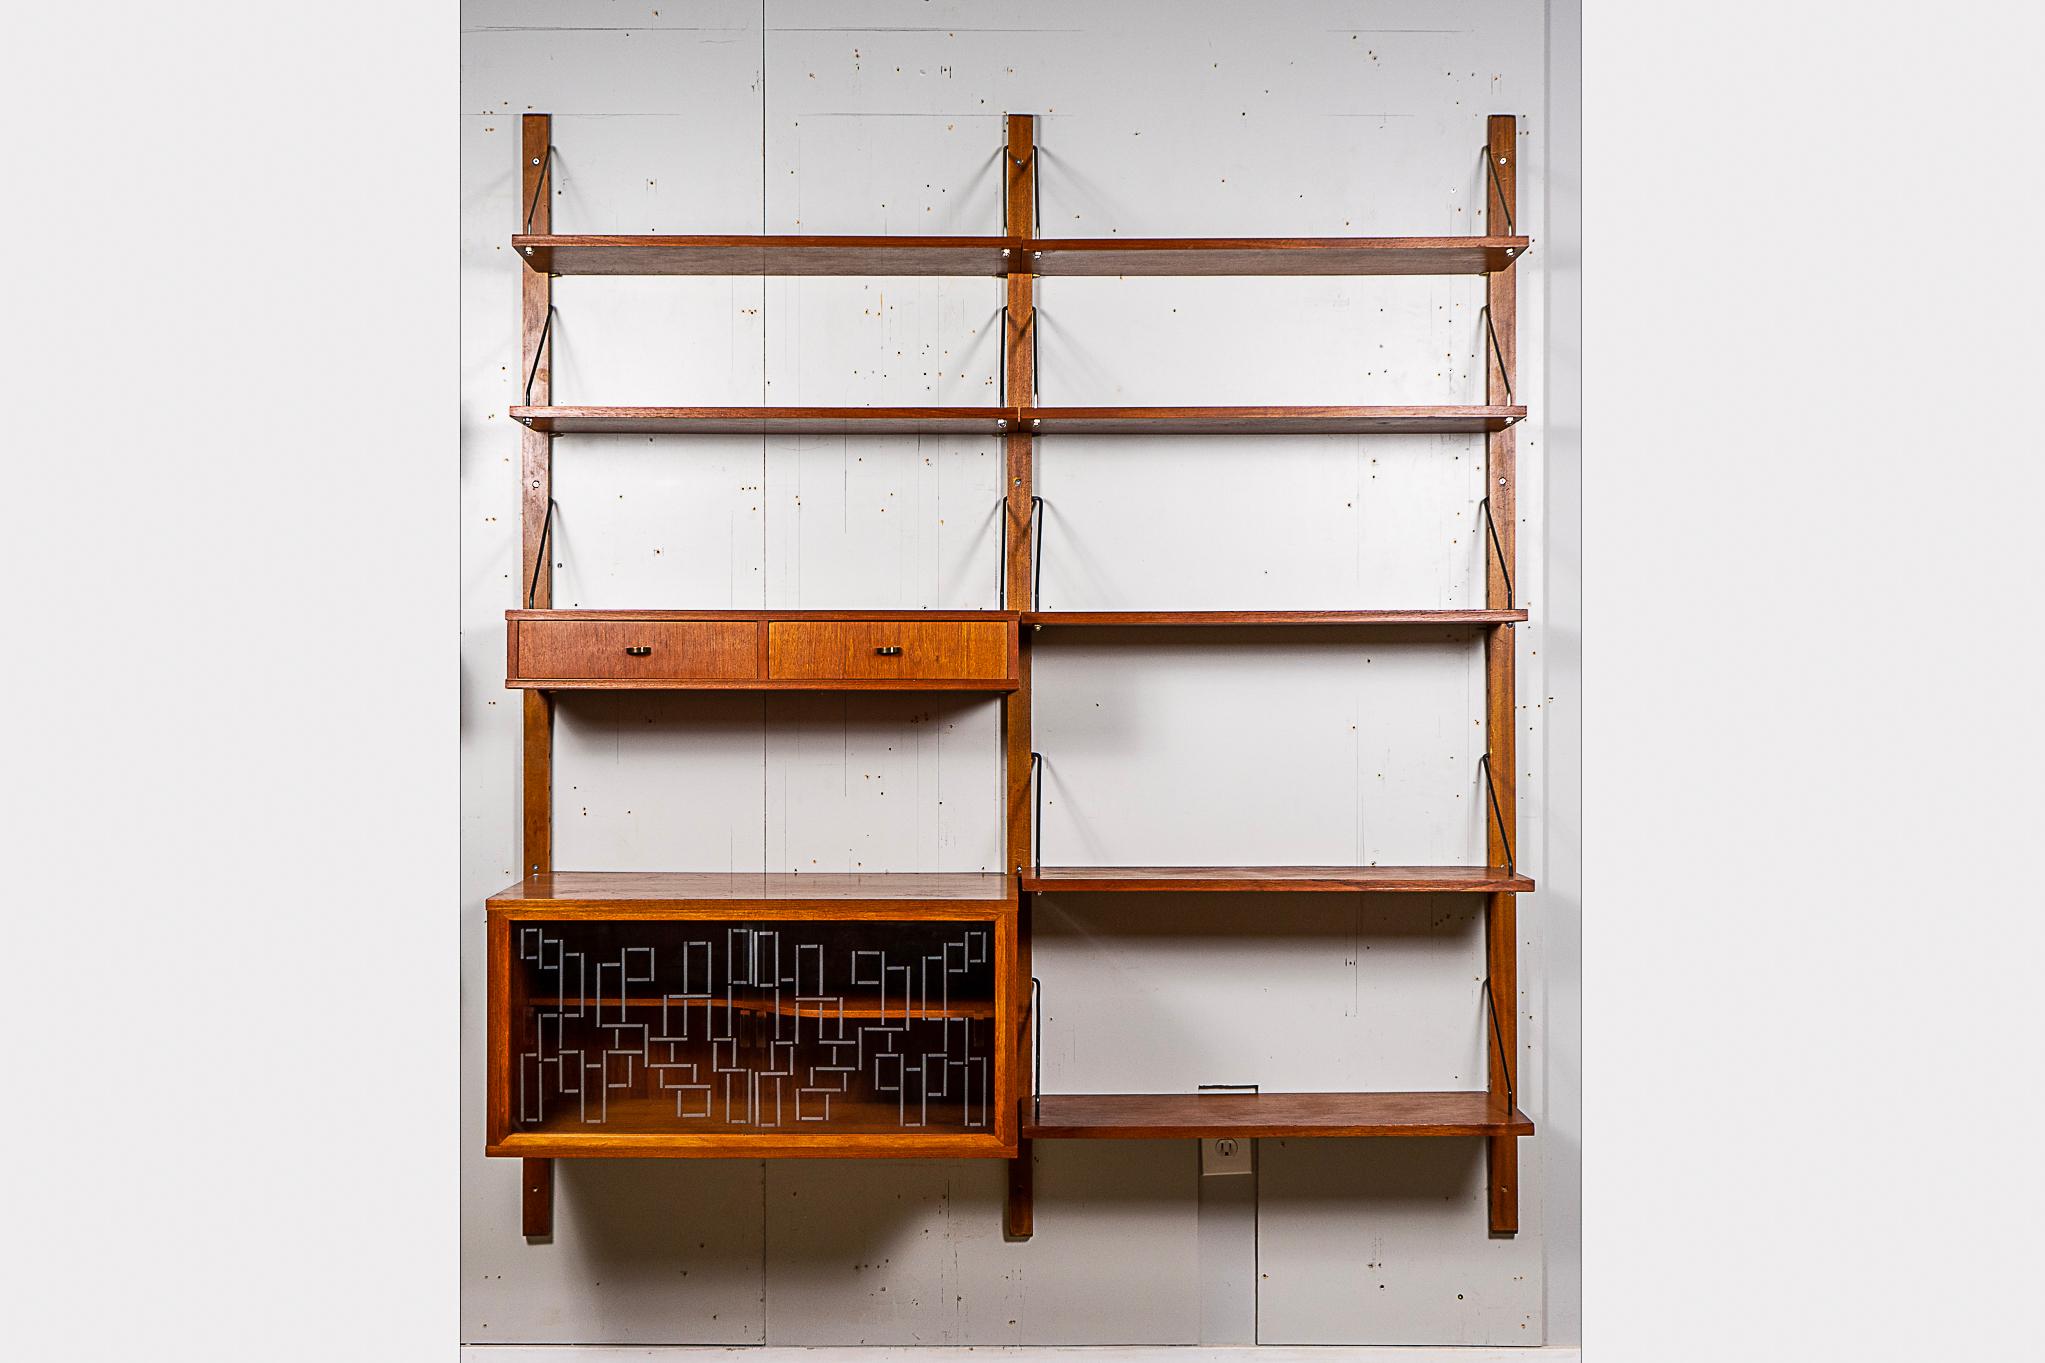 Teak Danish modern wall system, circa 1960's. Modular cabinetry and shelving, hang it anyway you like! 14